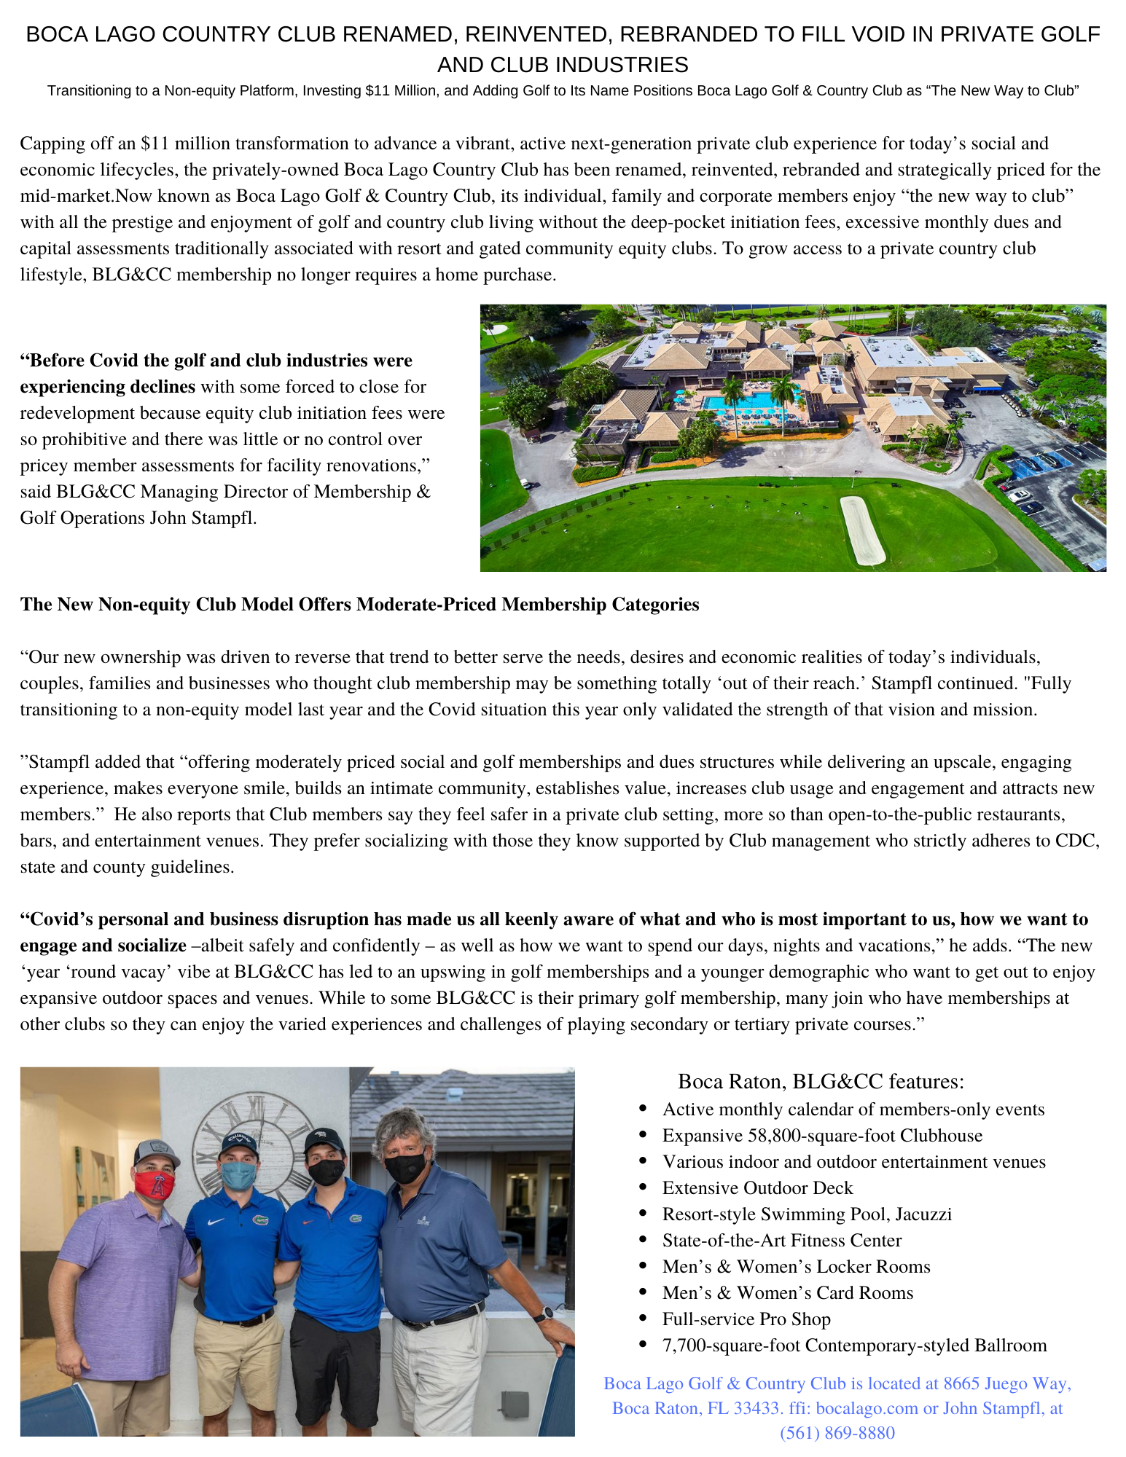 Boca Lago Country ClubRenames Dropping off an $11 million transformation to advance a vibrant, active next-generation private club experience for today’s social and economic lifecycles, the privately-owned Boca Lago Country Club has been renamed, reinvented, rebranded and strategically priced for the mid-market.﻿Now known as Boca Lago Golf & Country Club, its individual, family and corporate members enjoy “the new way to club” with all the prestige and enjoyment of golf and country club living without the deep-pocket initiation fees, excessive monthly dues and capital assessments traditionally associated with resort and gated community equity clubs. To grow access to a private country club lifestyle, BLG&CC membership no longer requires a home purchase.